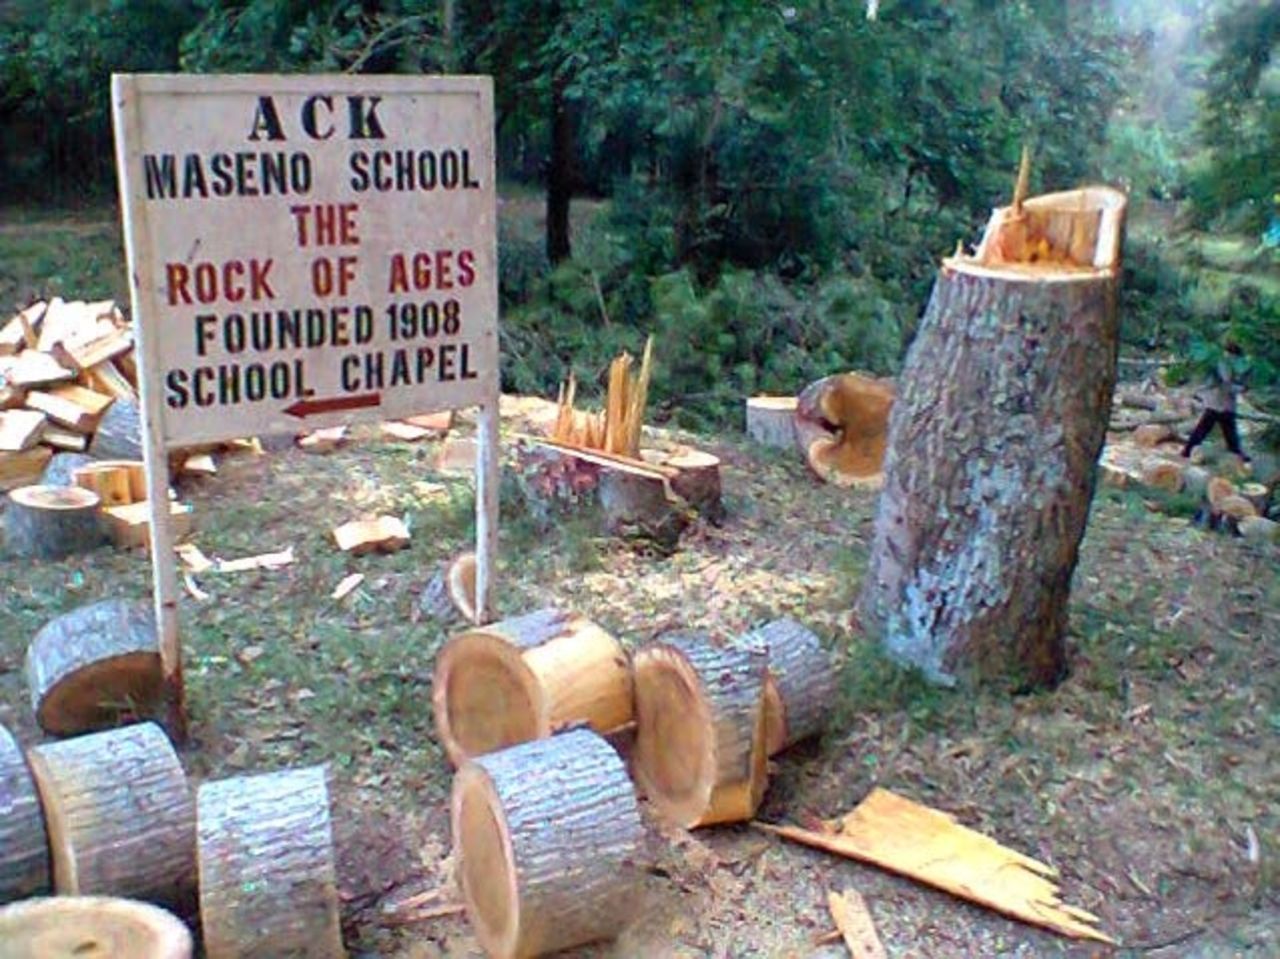 Mwasaru calculated that, per term, his school used 28 trucks of wood, or 196 tonnes to create enough energy to cook for all the students. This demand for timber caused problems with the local community who collected firewood from the same forest.